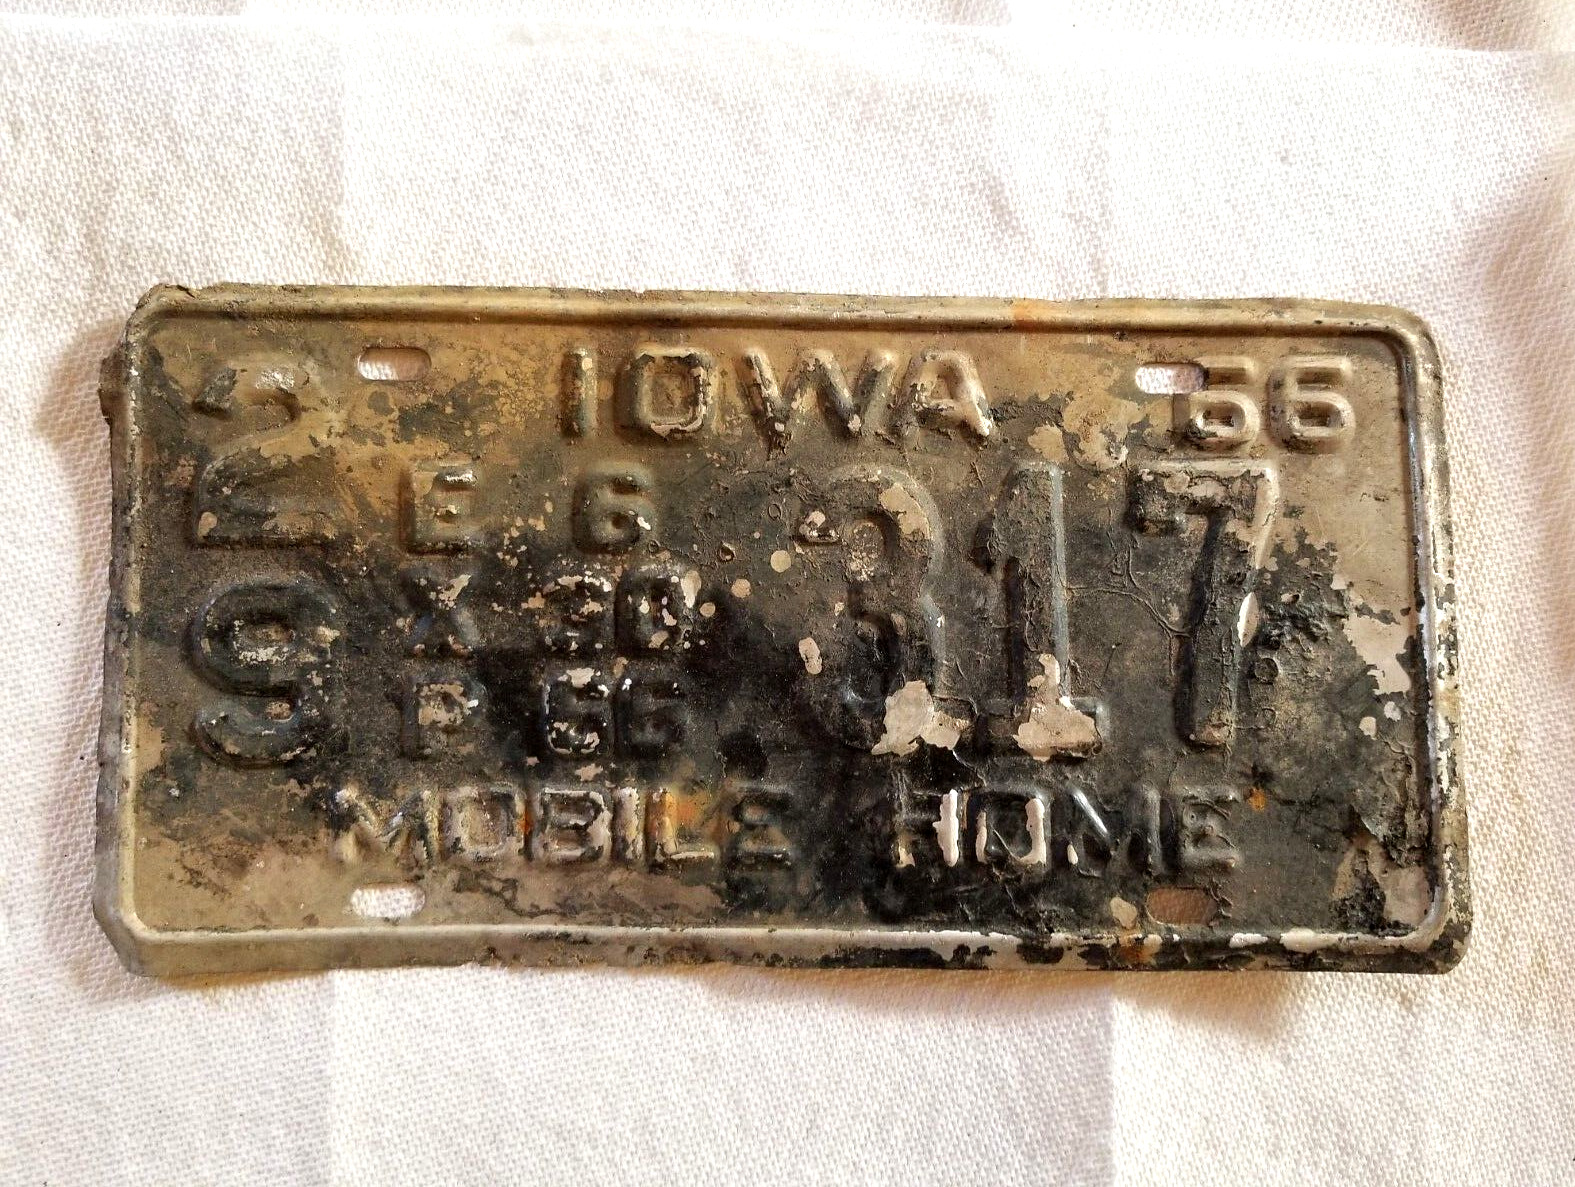 Iowa 1966 Metal Expired License Plate 29-317 Des Moines County MOBILE HOME